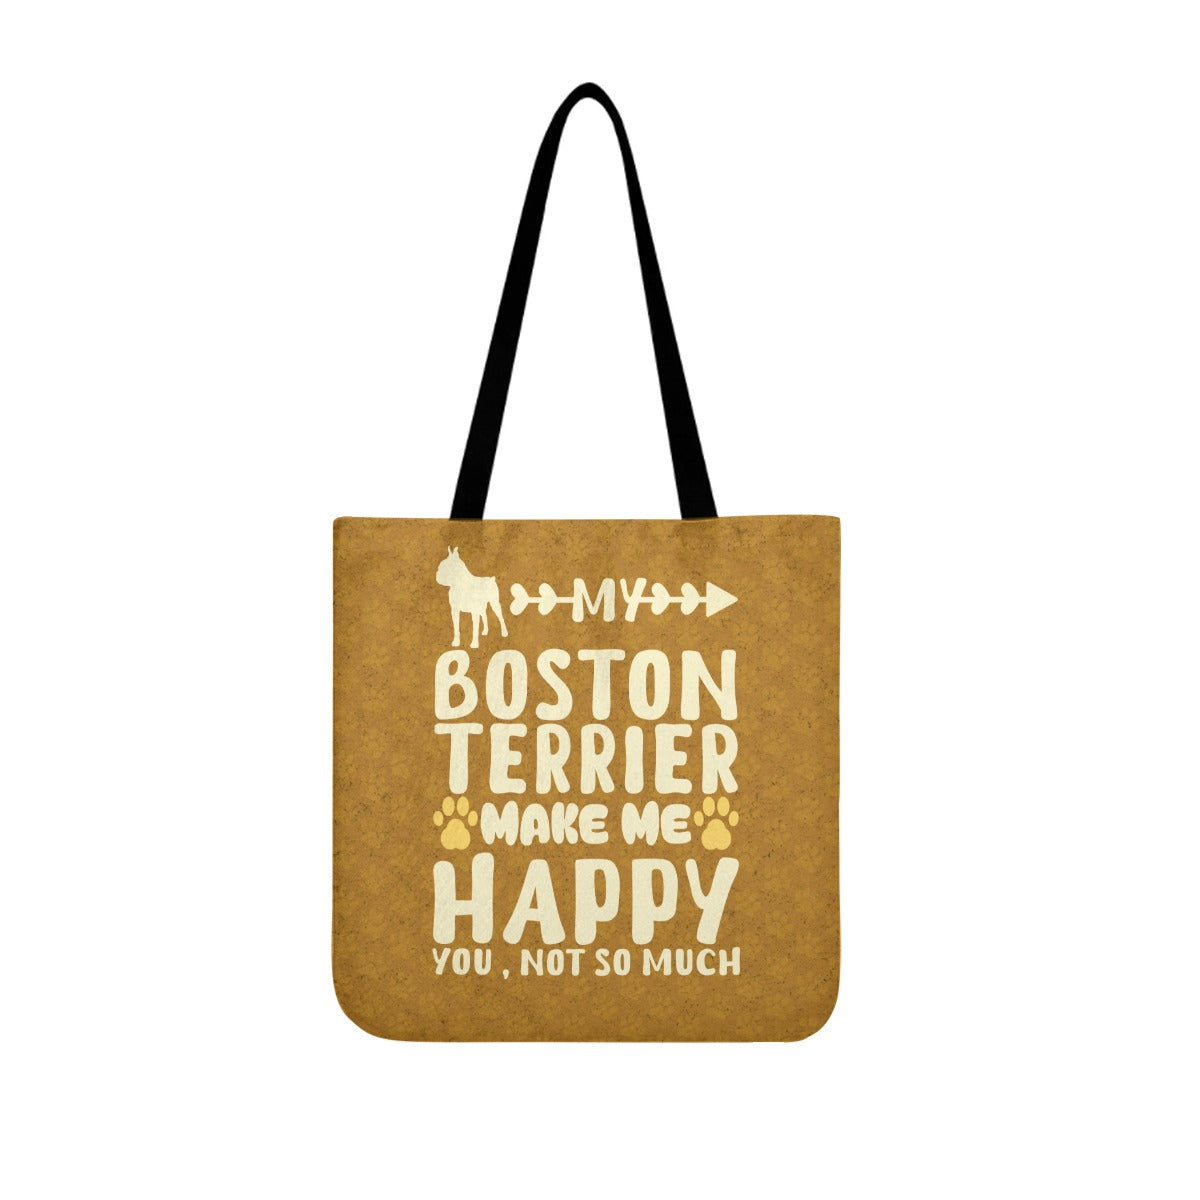 Hazel - Cloth Tote Bags for Boston Terrier lovers